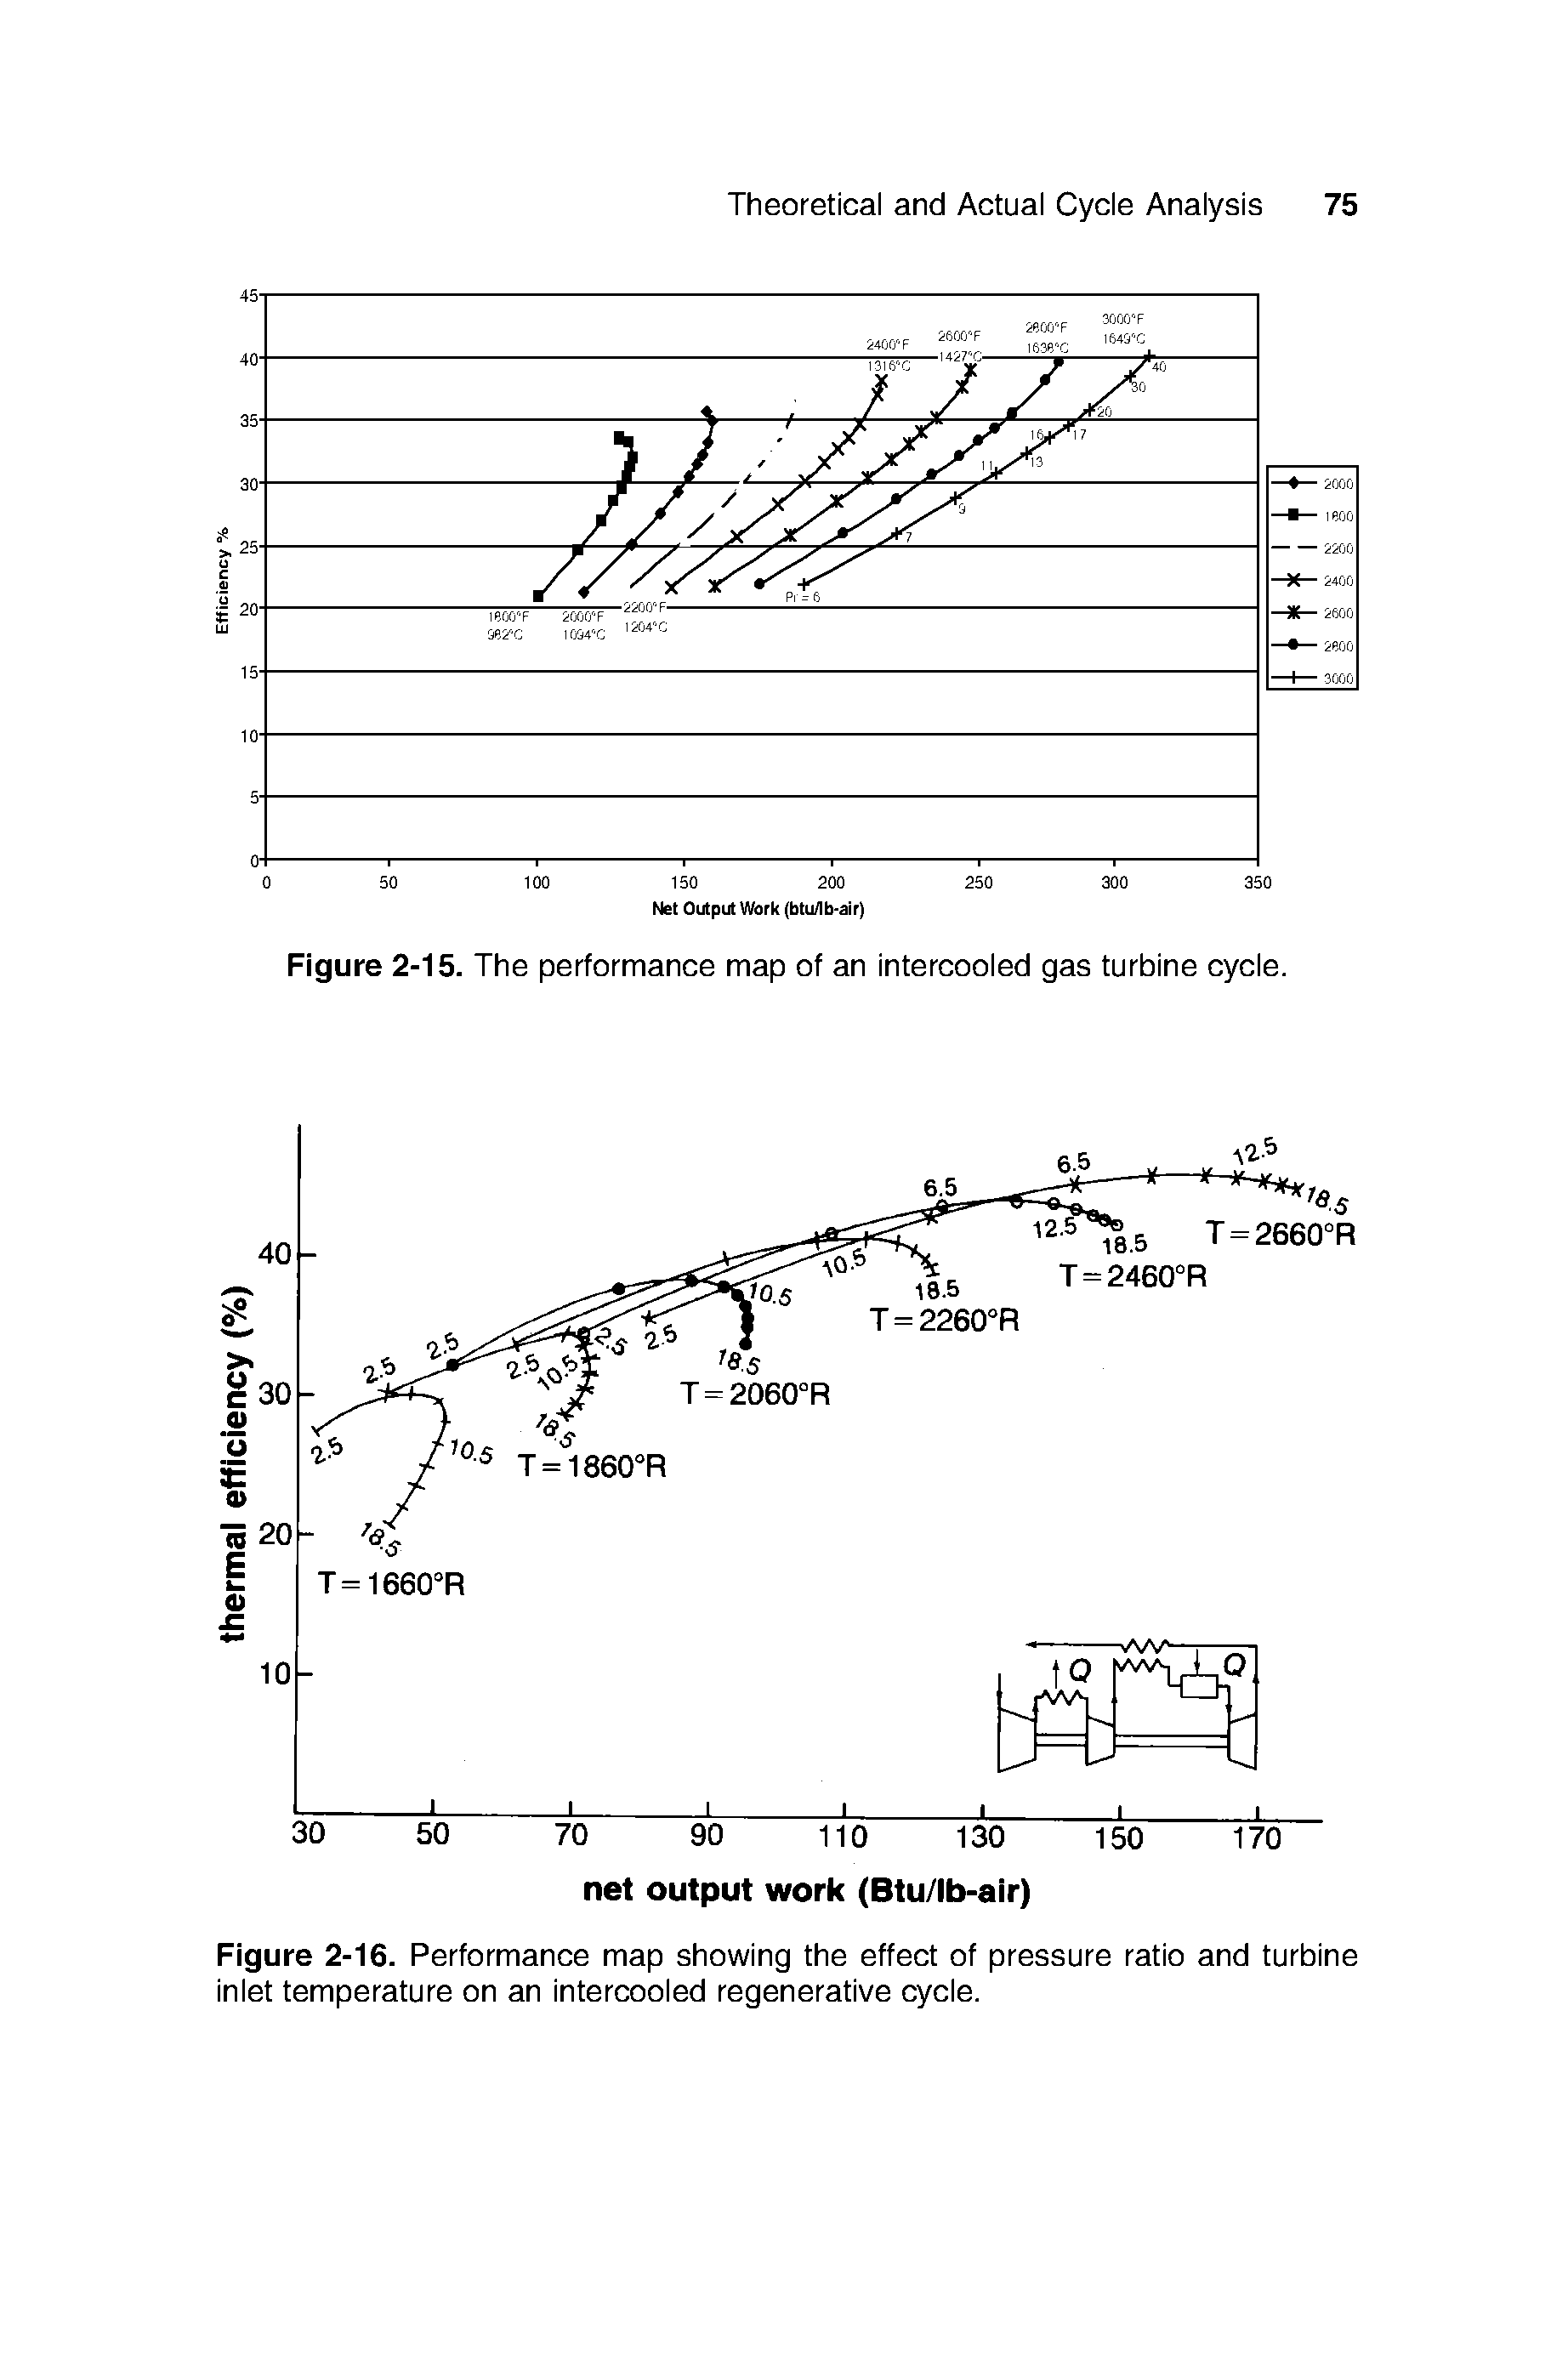 Figure 2-16. Performance map showing the effect of pressure ratio and turbine inlet temperature on an intercooled regenerative cycle.